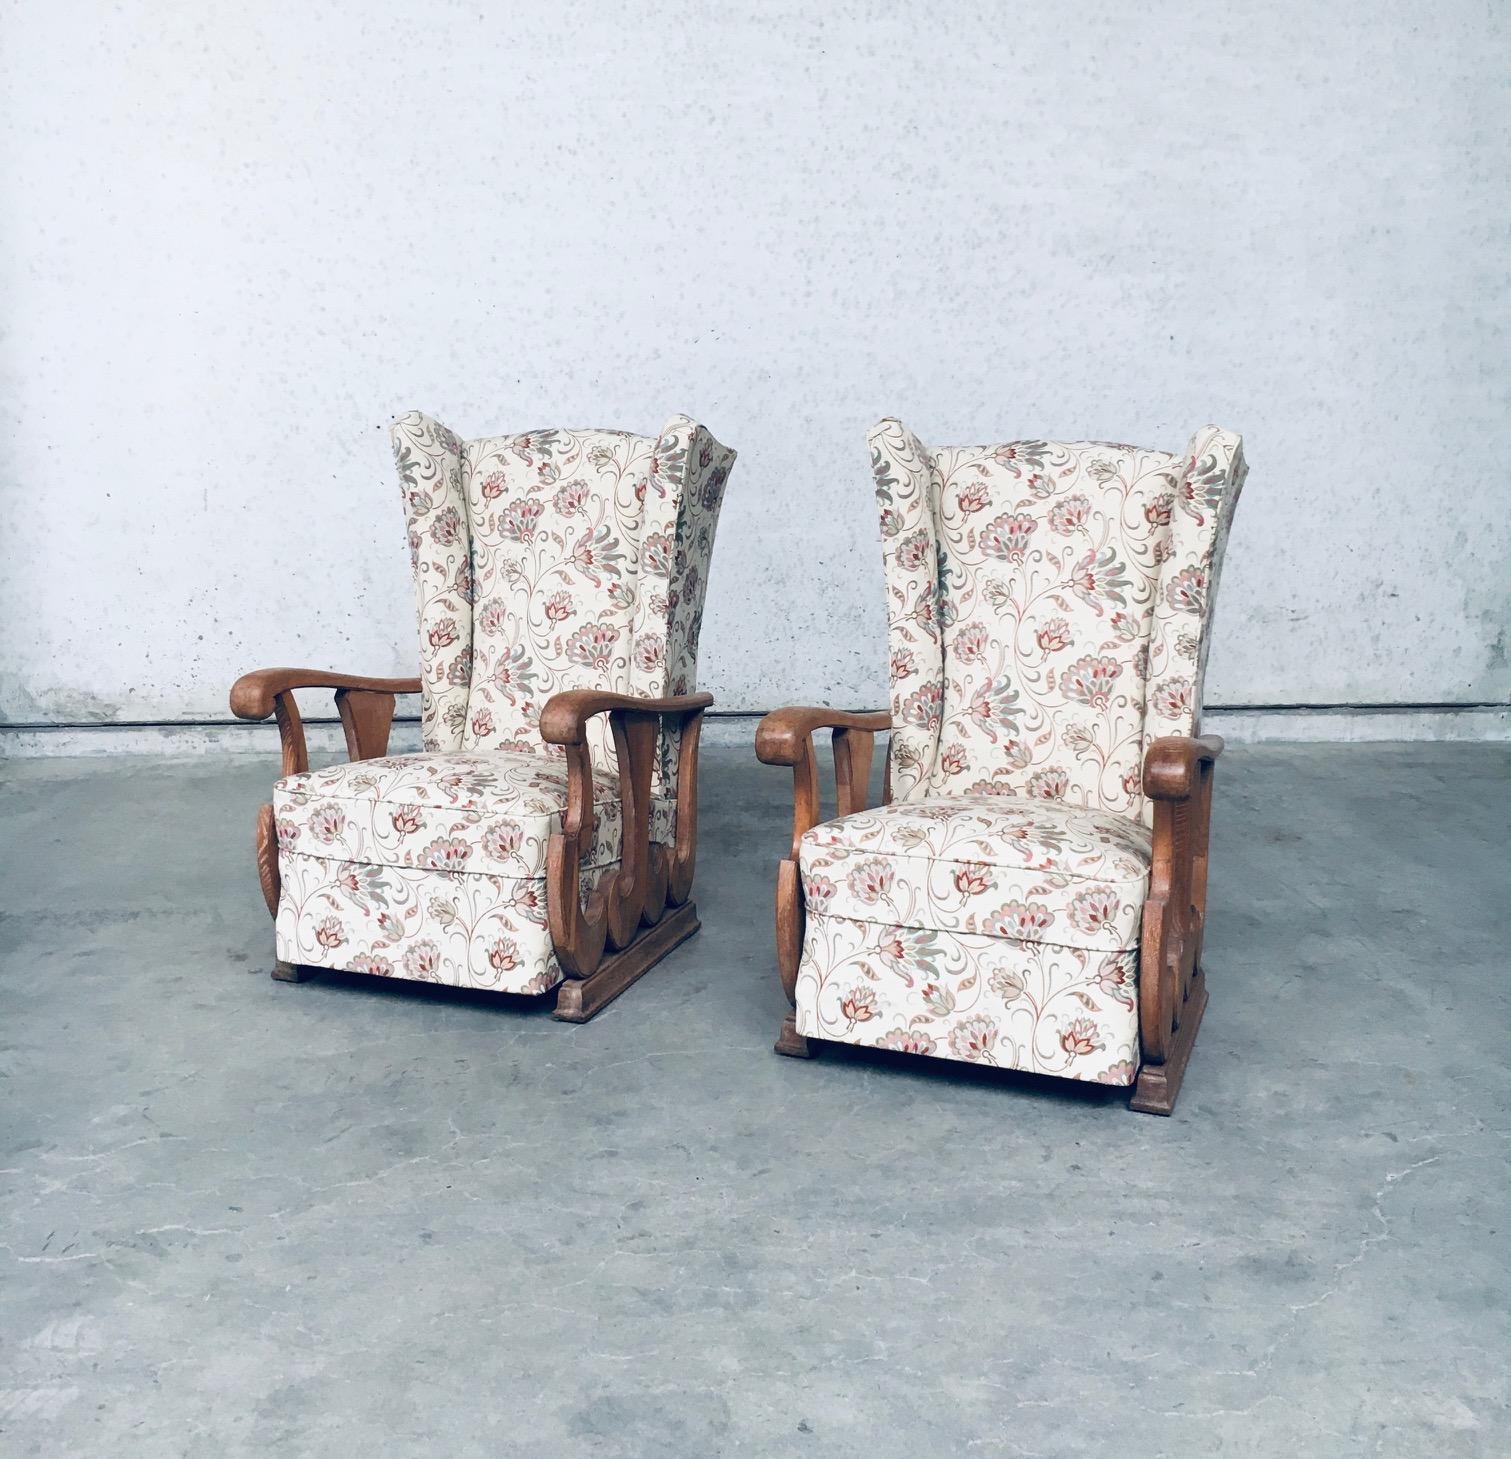 Original early 1900's design high wing back armchair Fauteuil set of 2. Made in France, 1920's - 1930's. High wing back arm chair with oak sculptural carved arm rests and recently reupholstered flower print fabric. These come from the first owner